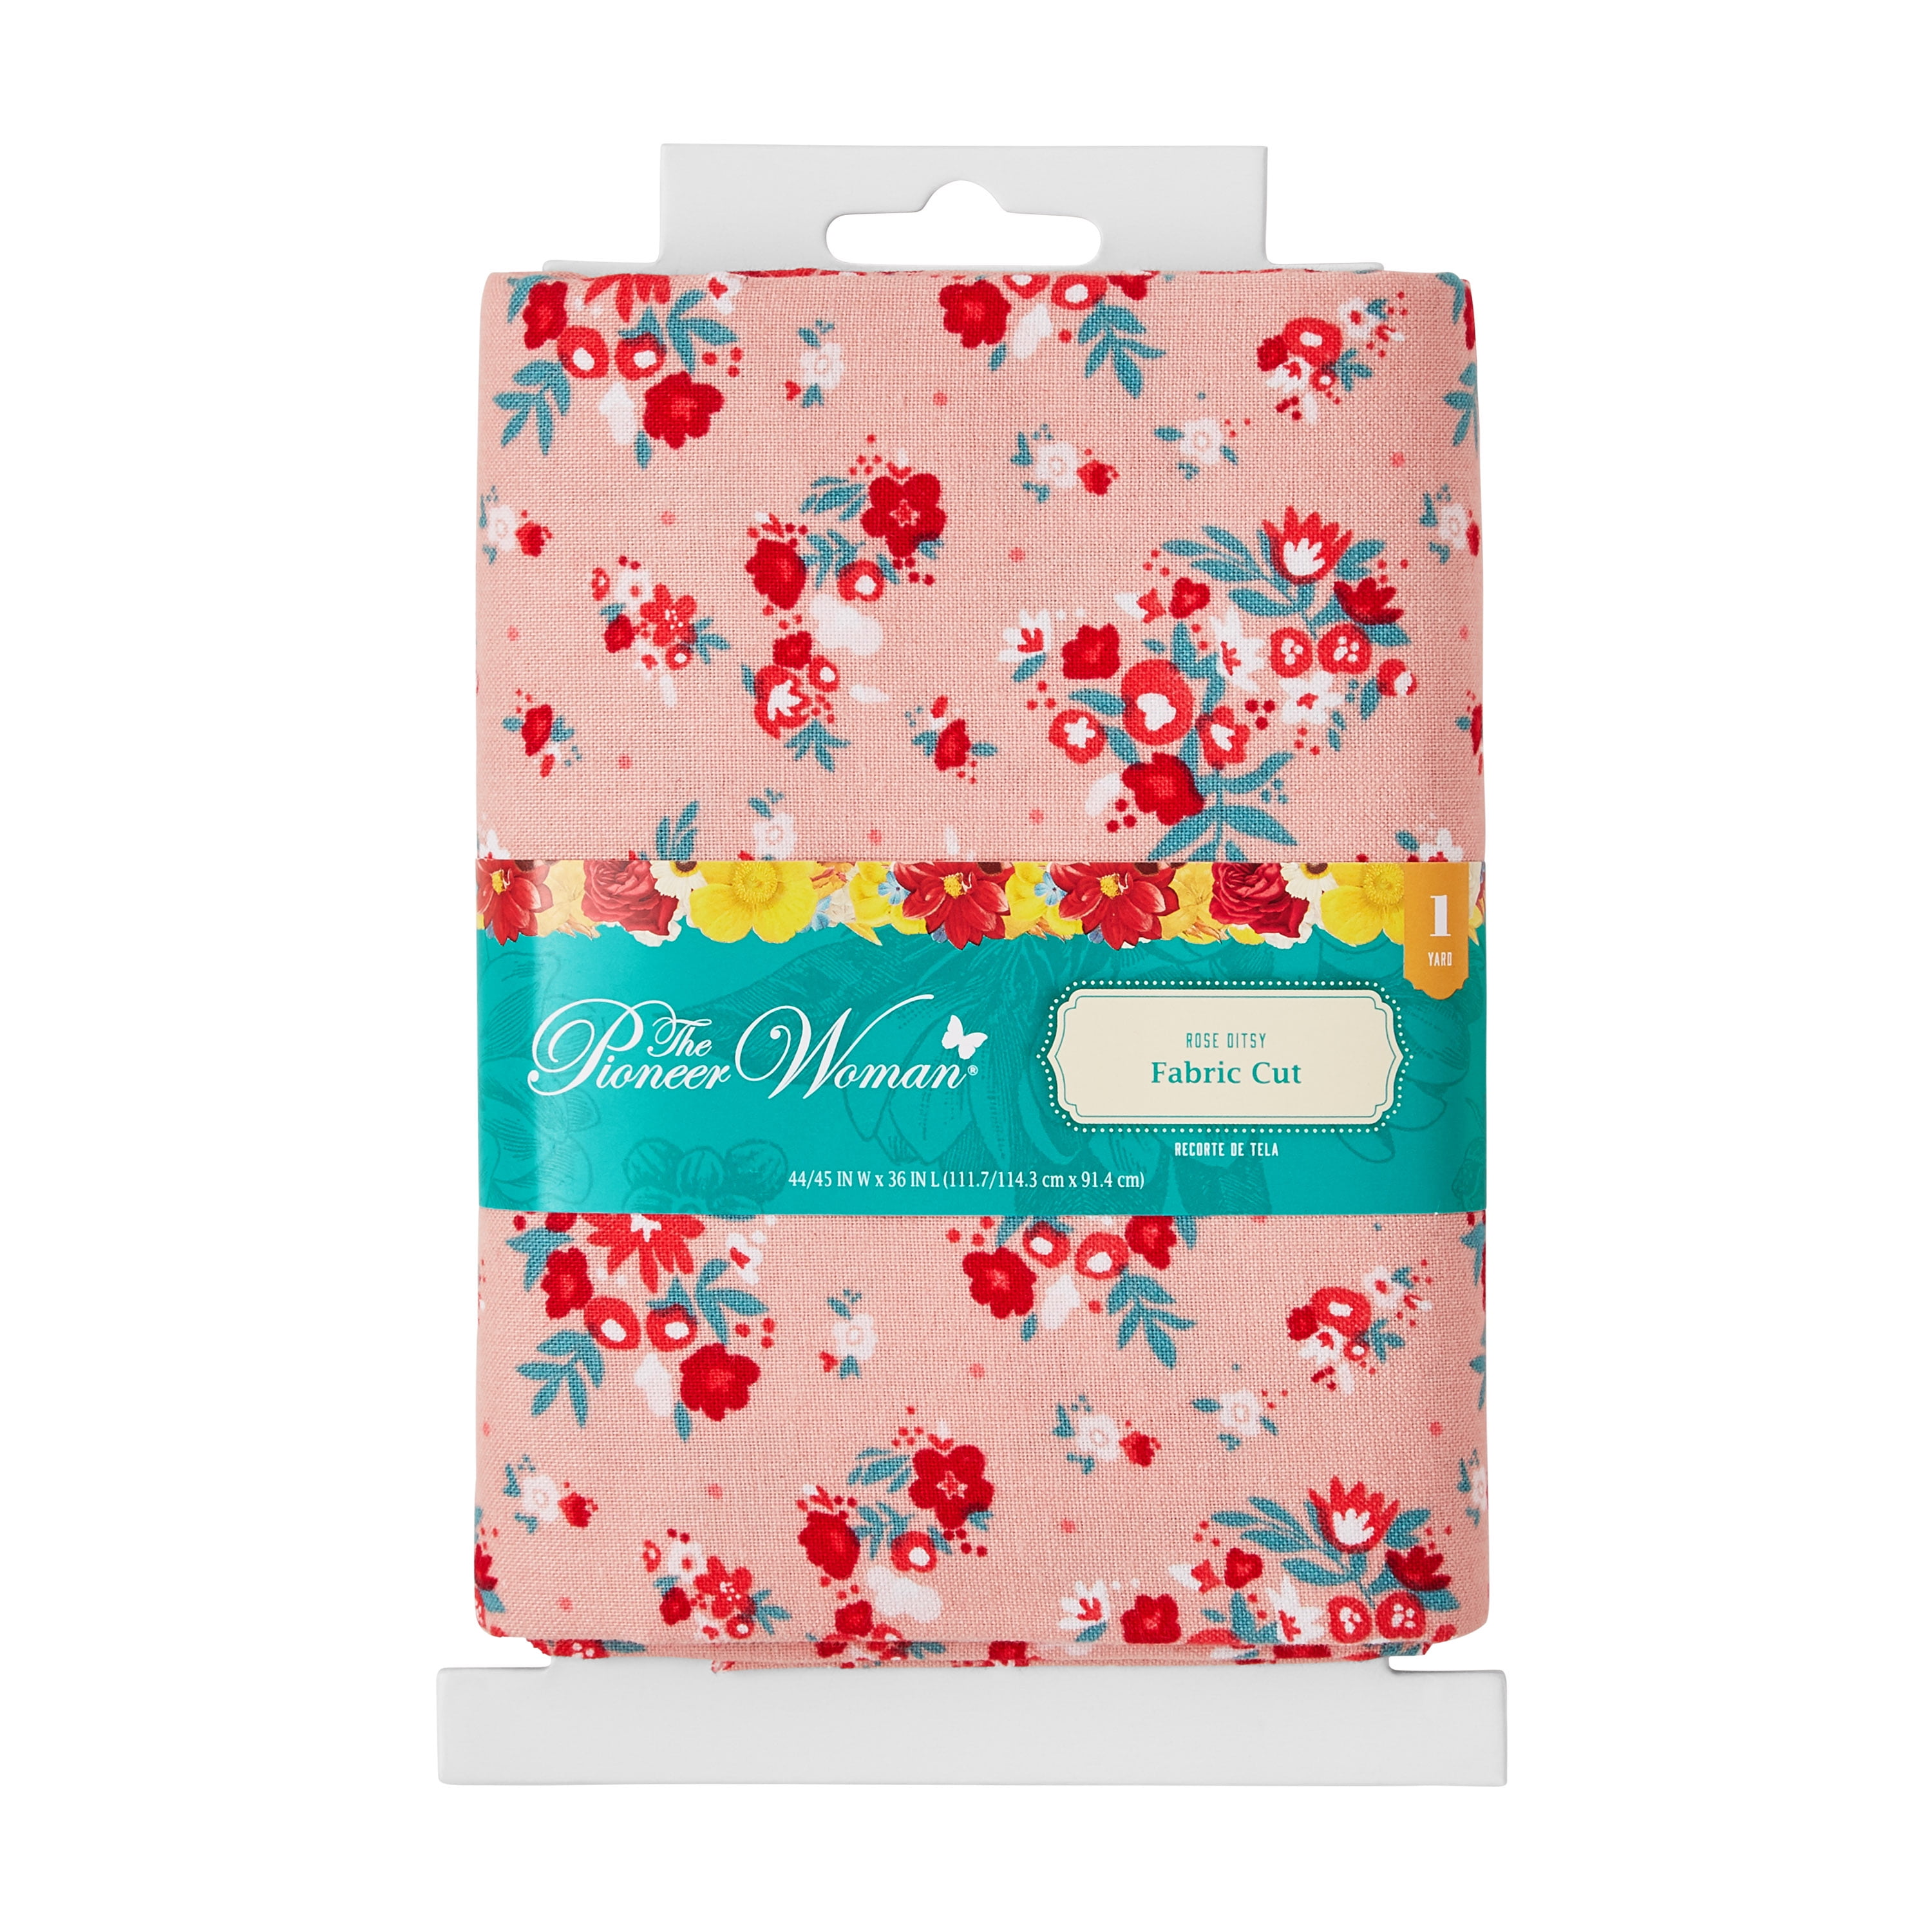 Rose Flavor 16oz Cotton Canvas Sewing & Crafting,Drop Cloth by The Yard (Natural)